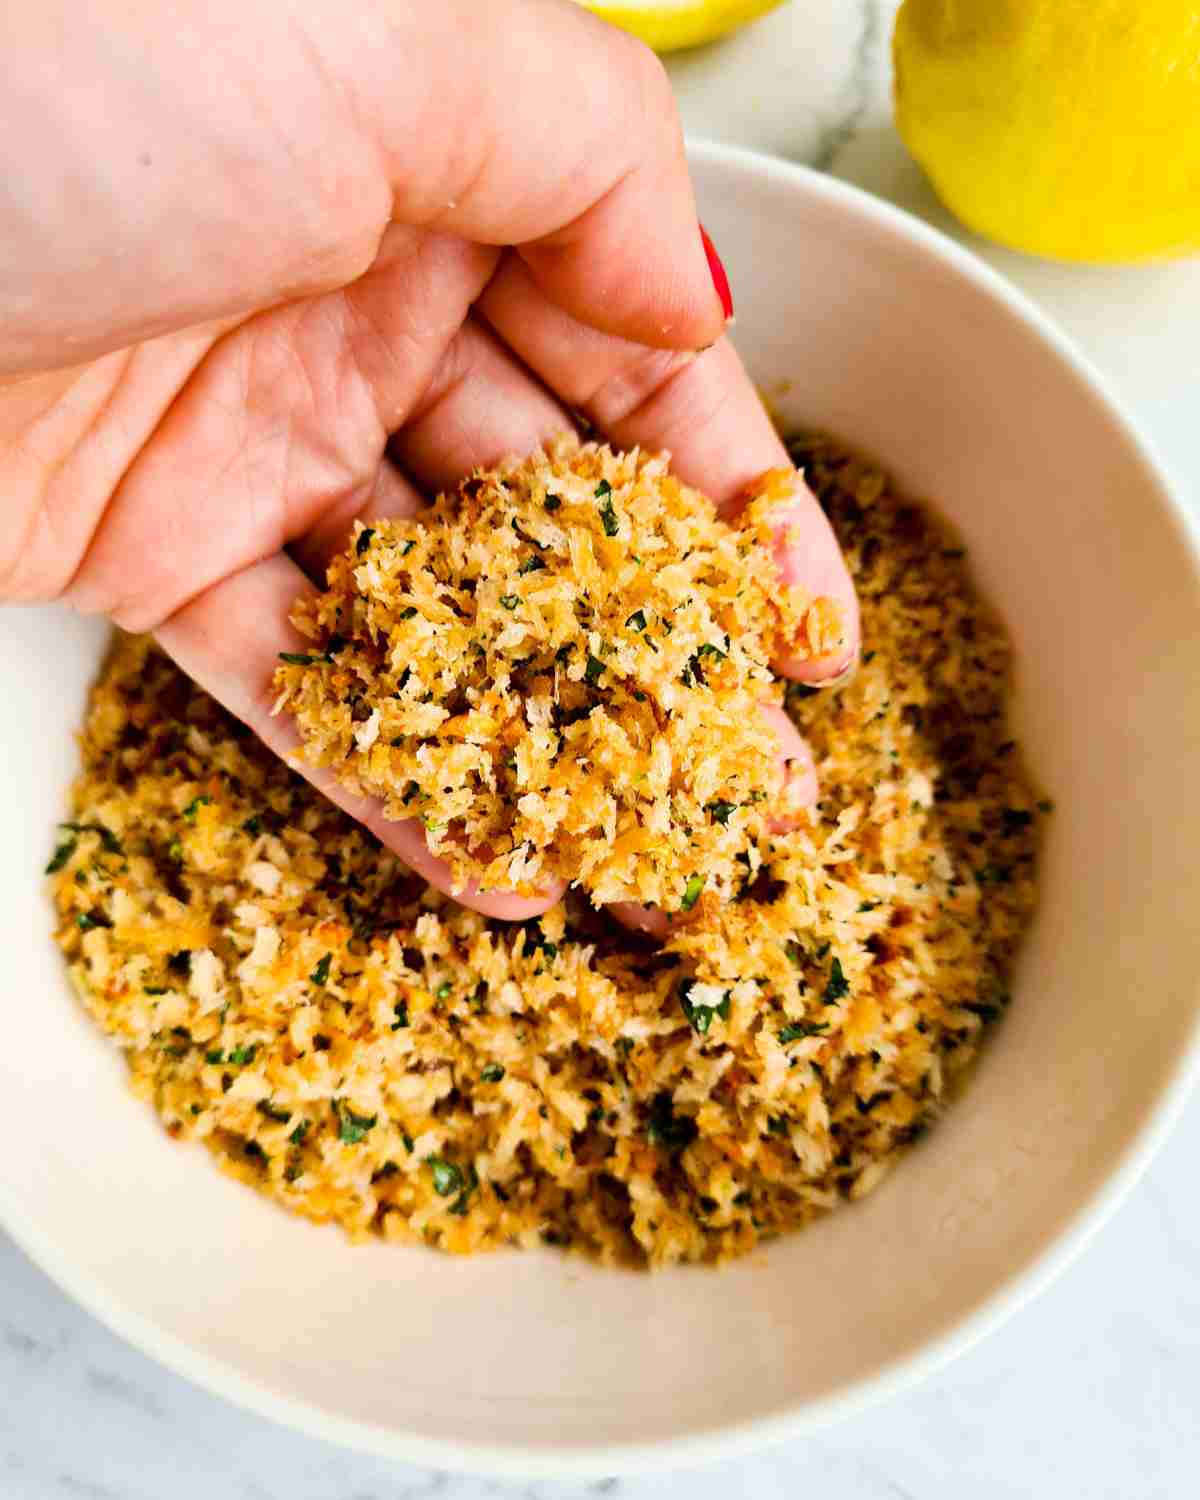 Golden herb breadcrumbs being scopped up by a hand over a bowl